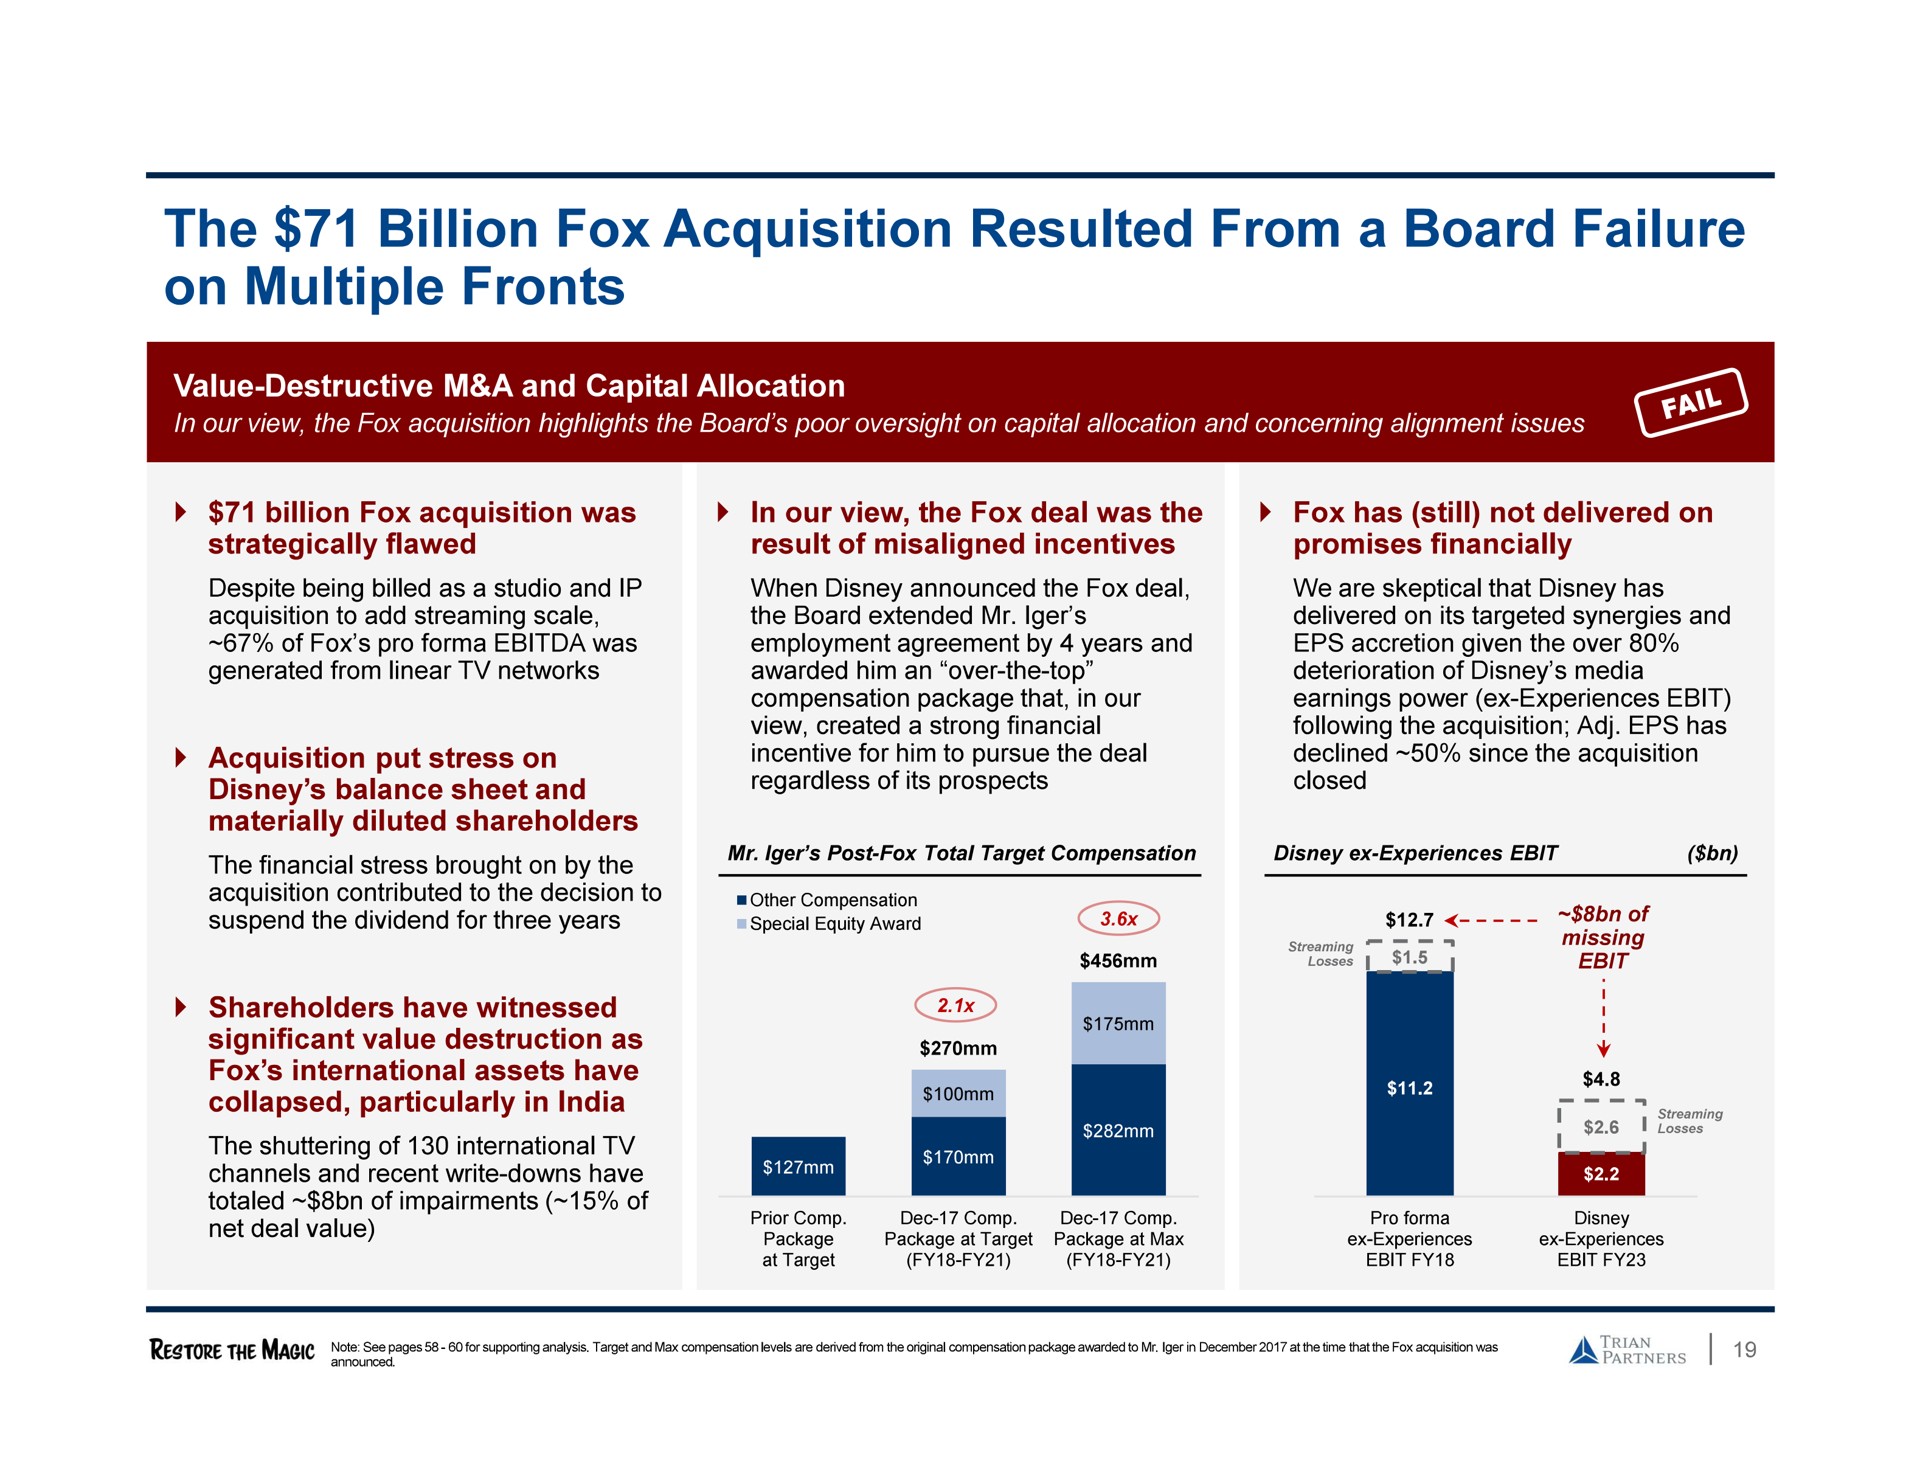 the billion fox acquisition resulted from a board failure on multiple fronts | Trian Partners